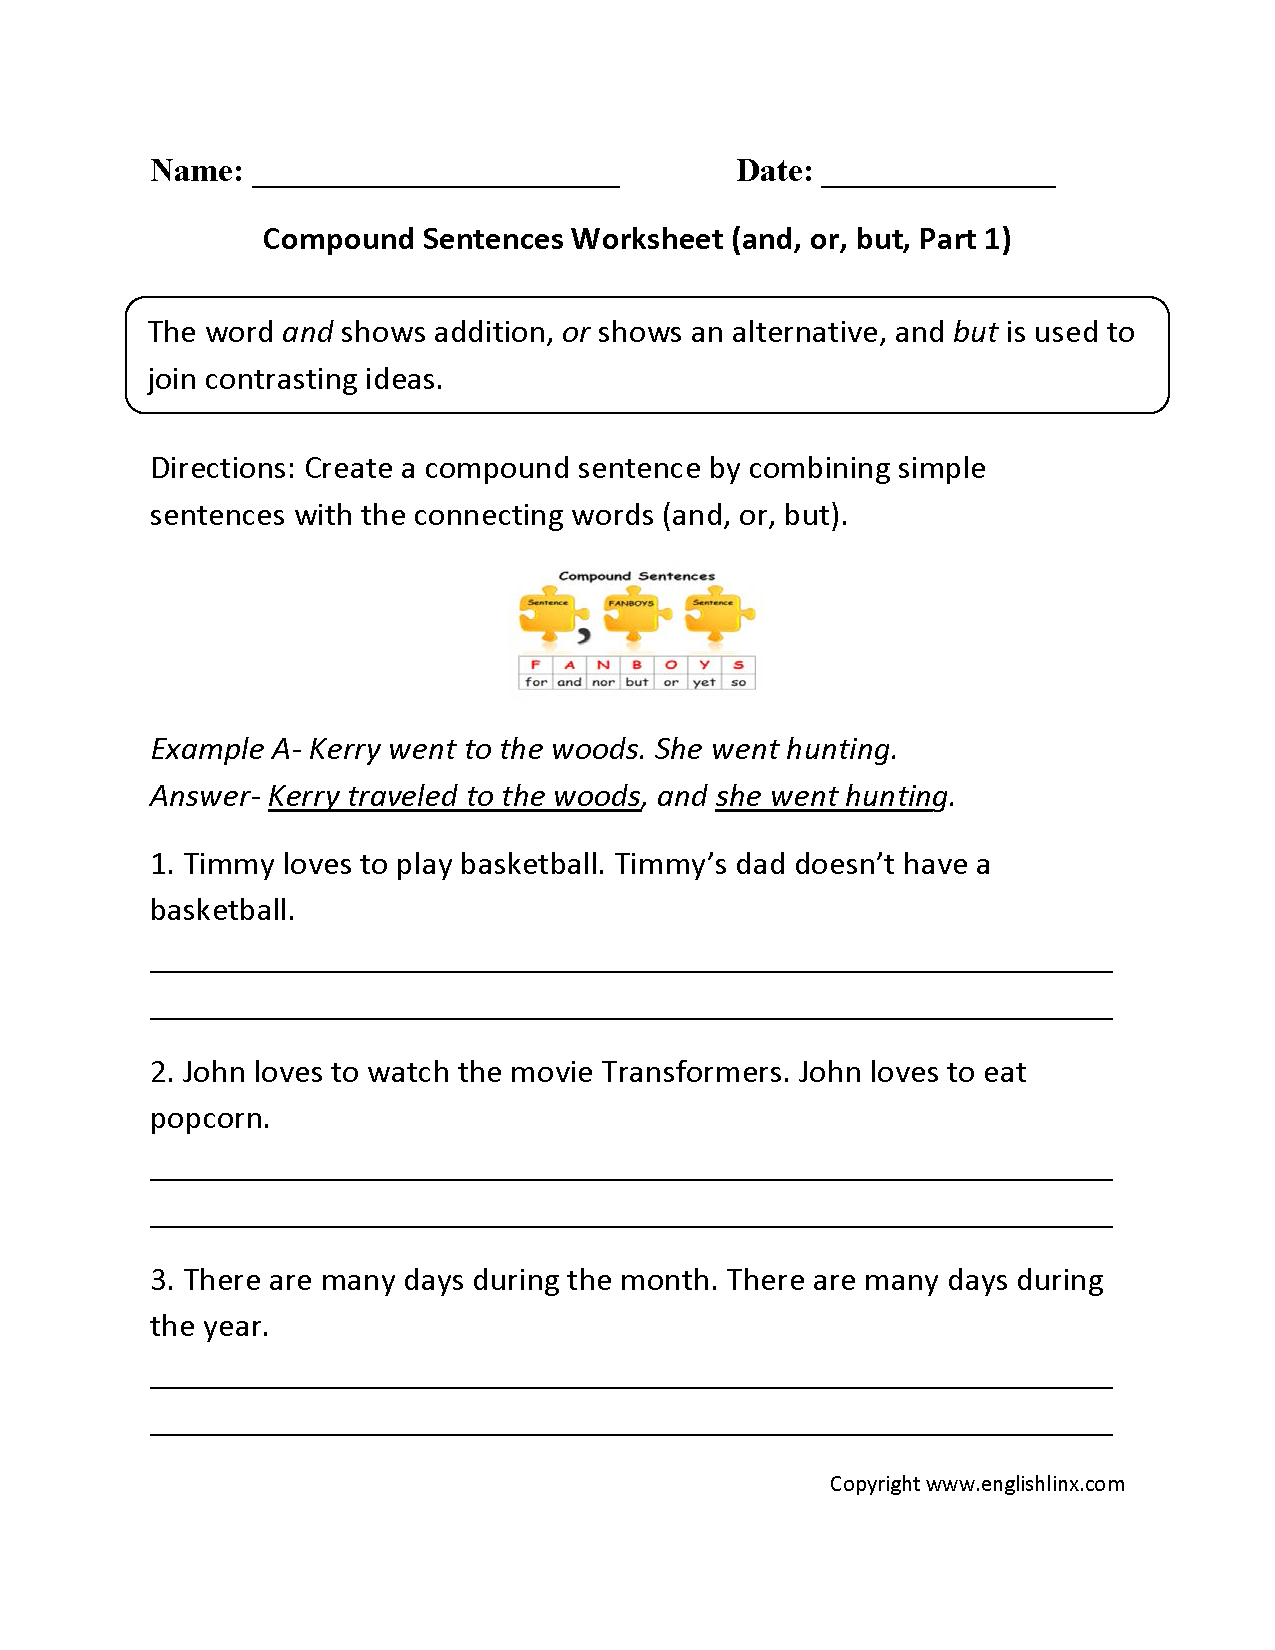 Compound Sentences Worksheet With Answers Pdf